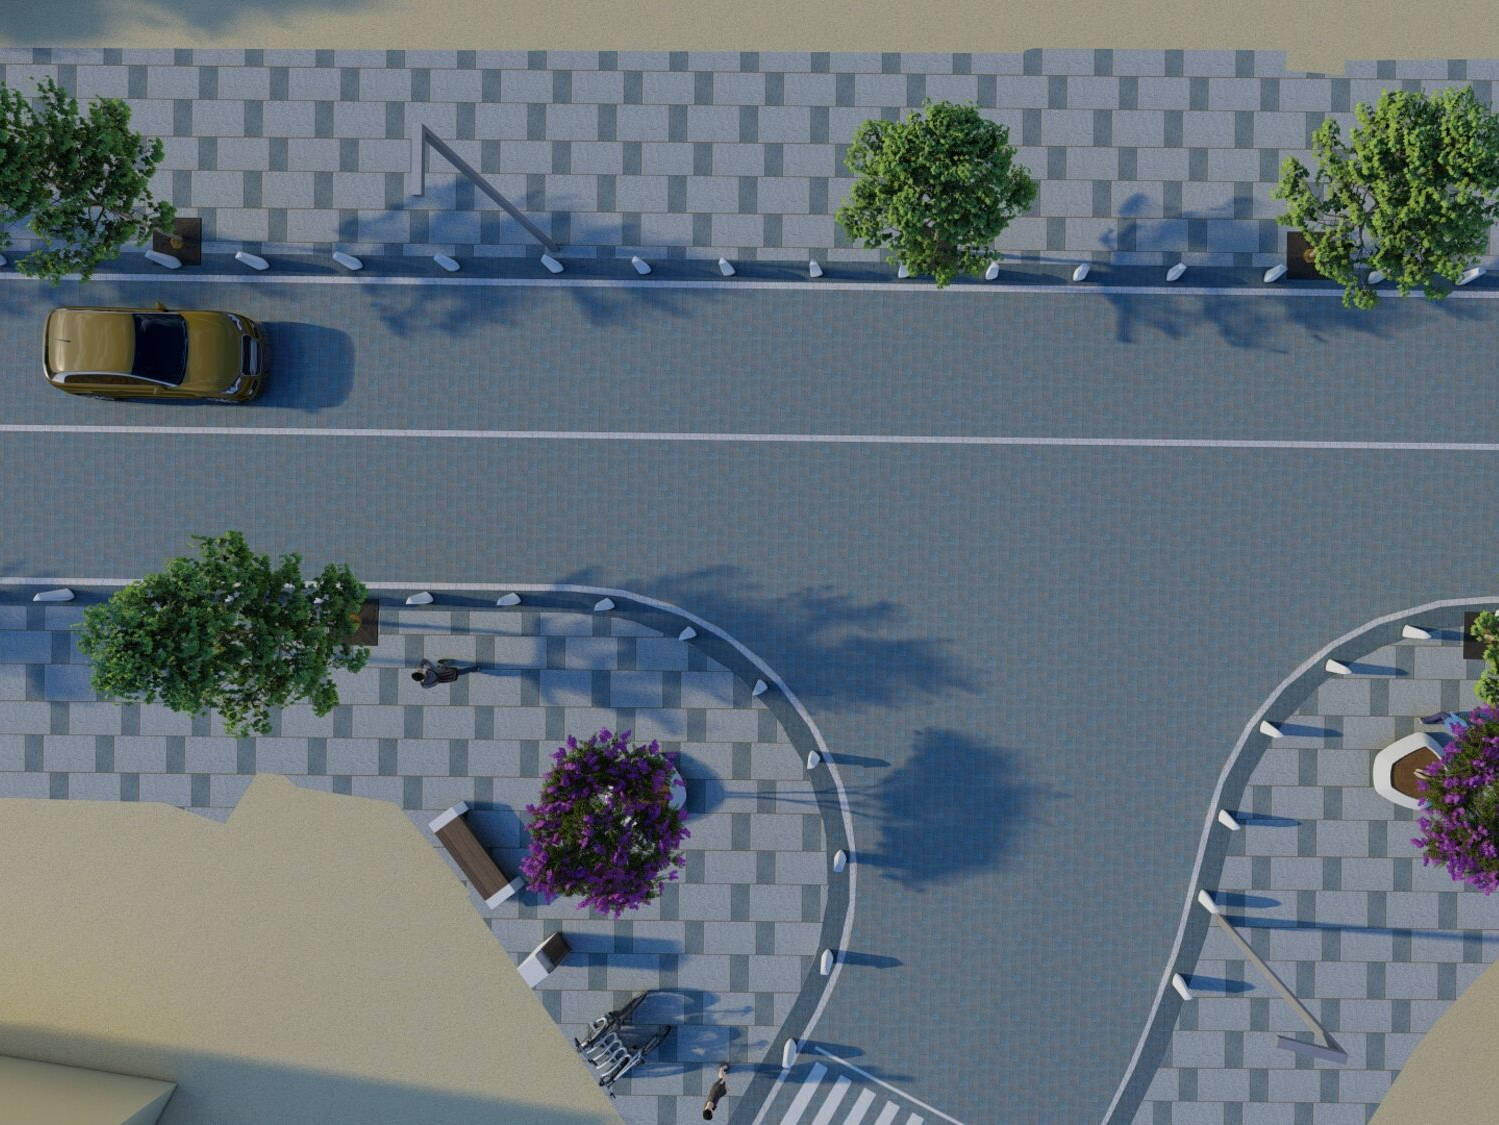 3D render showing proposed road design, top down view